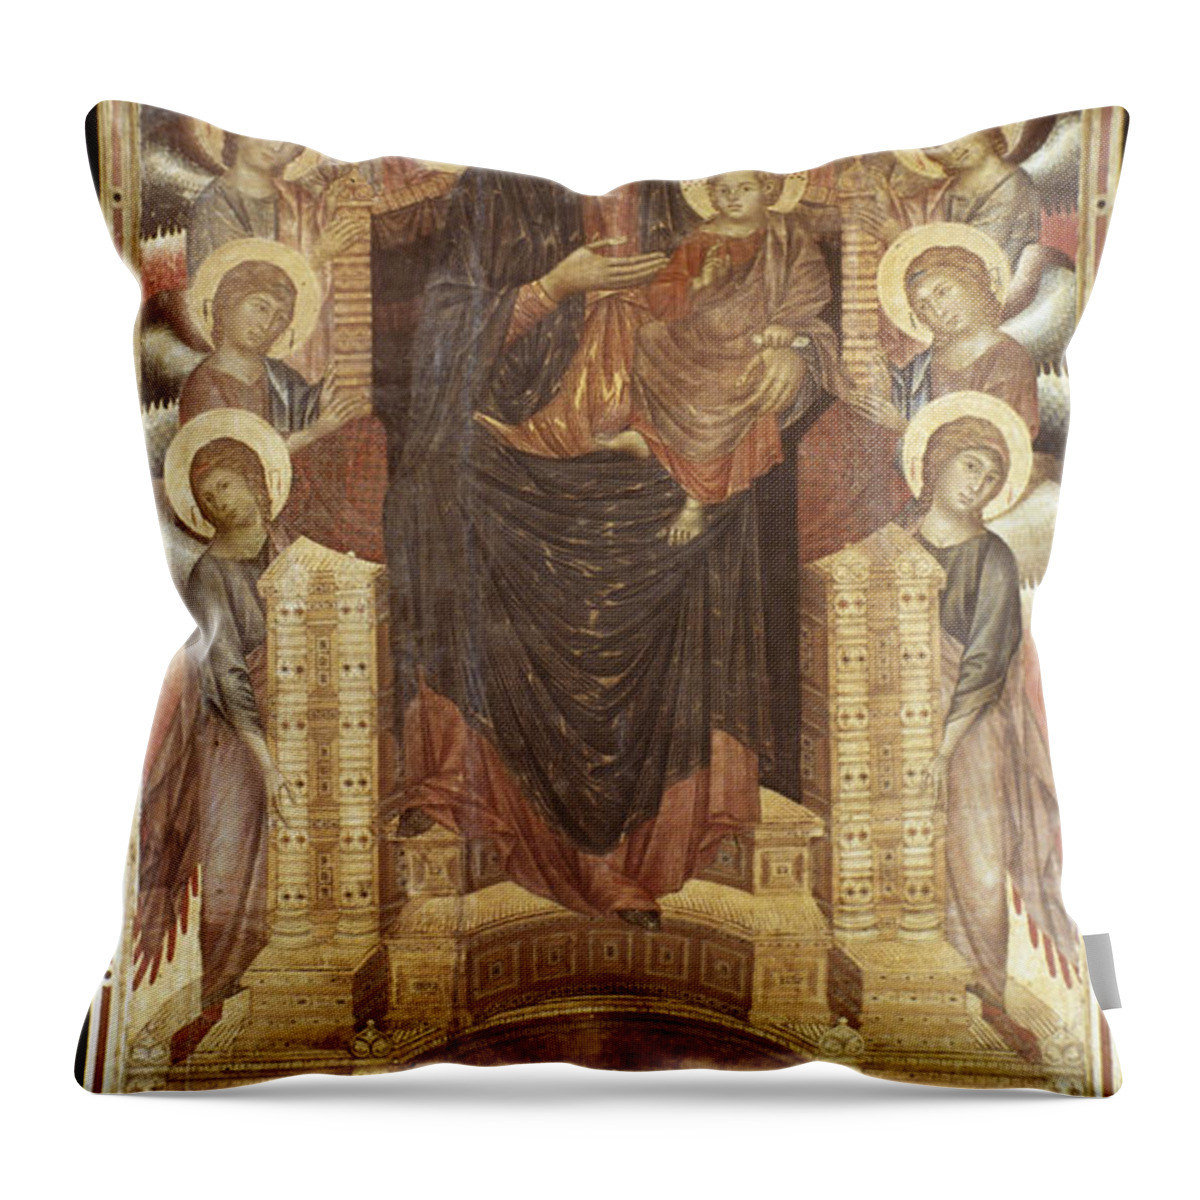 1280s Throw Pillow featuring the photograph Cimabue: Madonna #1 by Granger